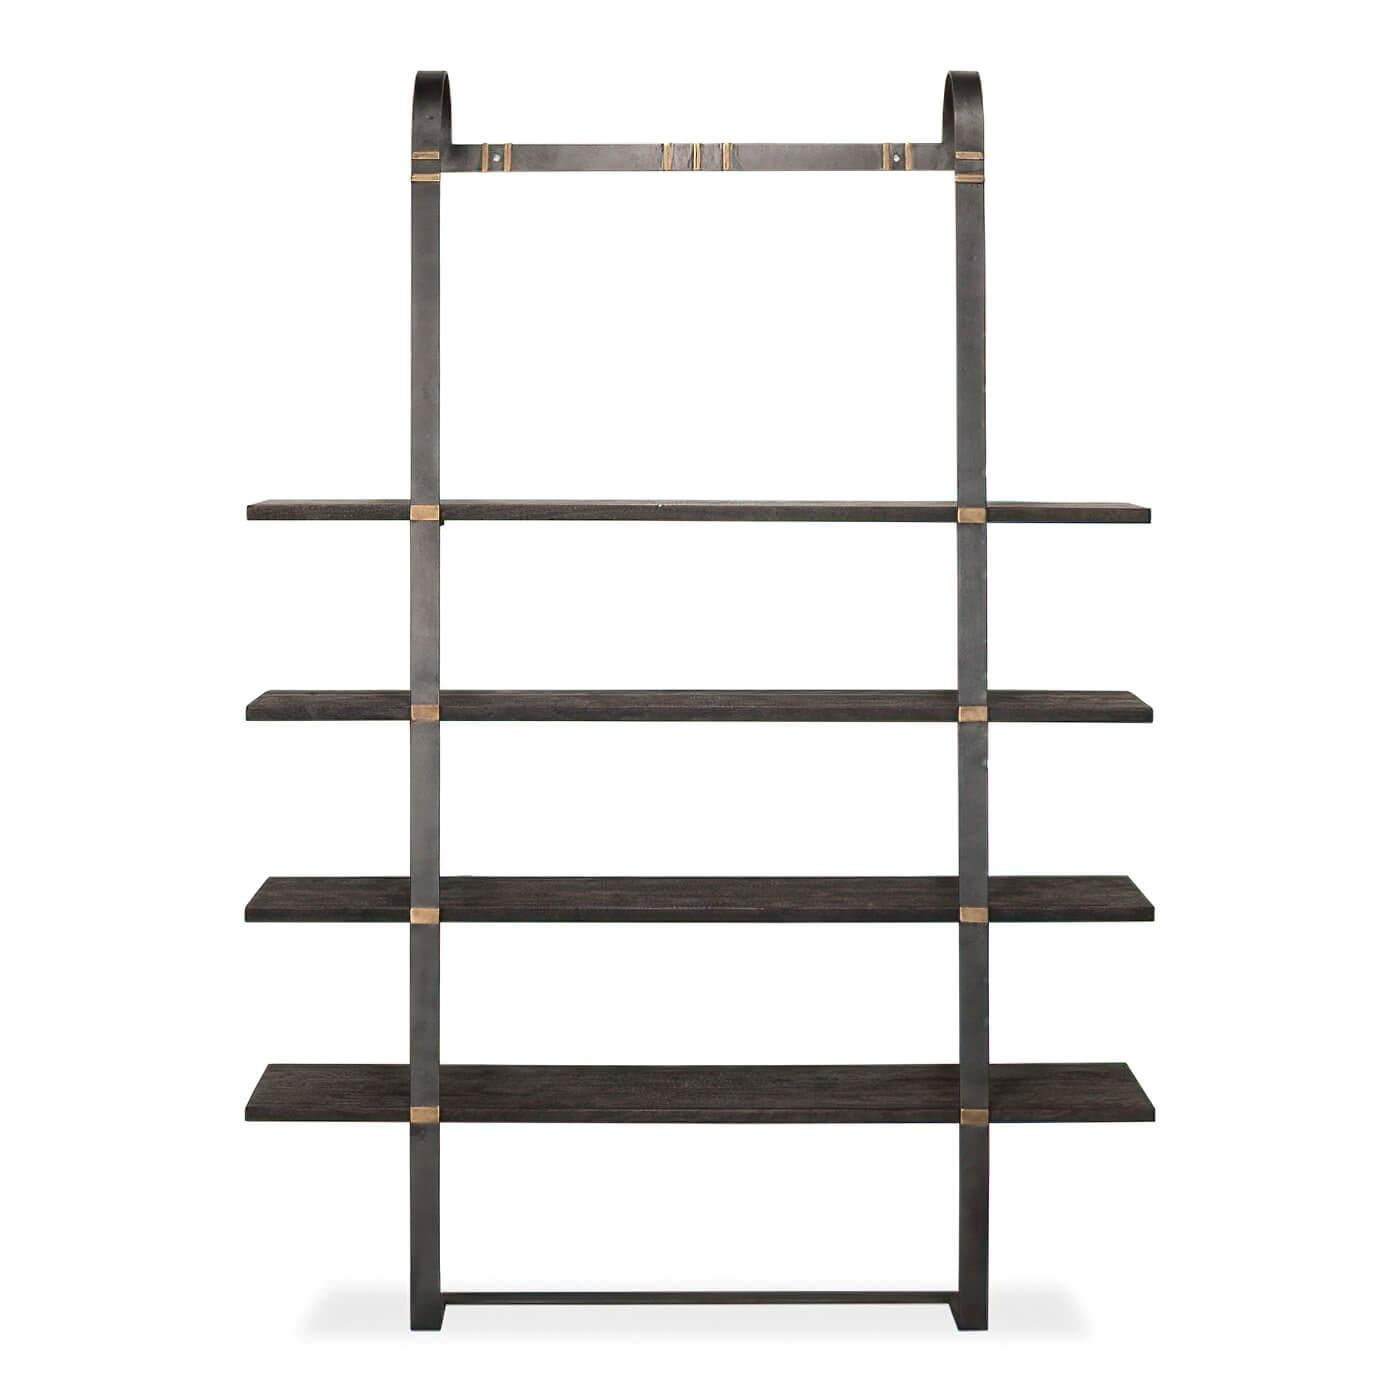 A wood and steel leaning bookshelf with hand-beaten steel, hardwood acacia, turned inside out and embossed with strips of brass. 

Dimensions:
59